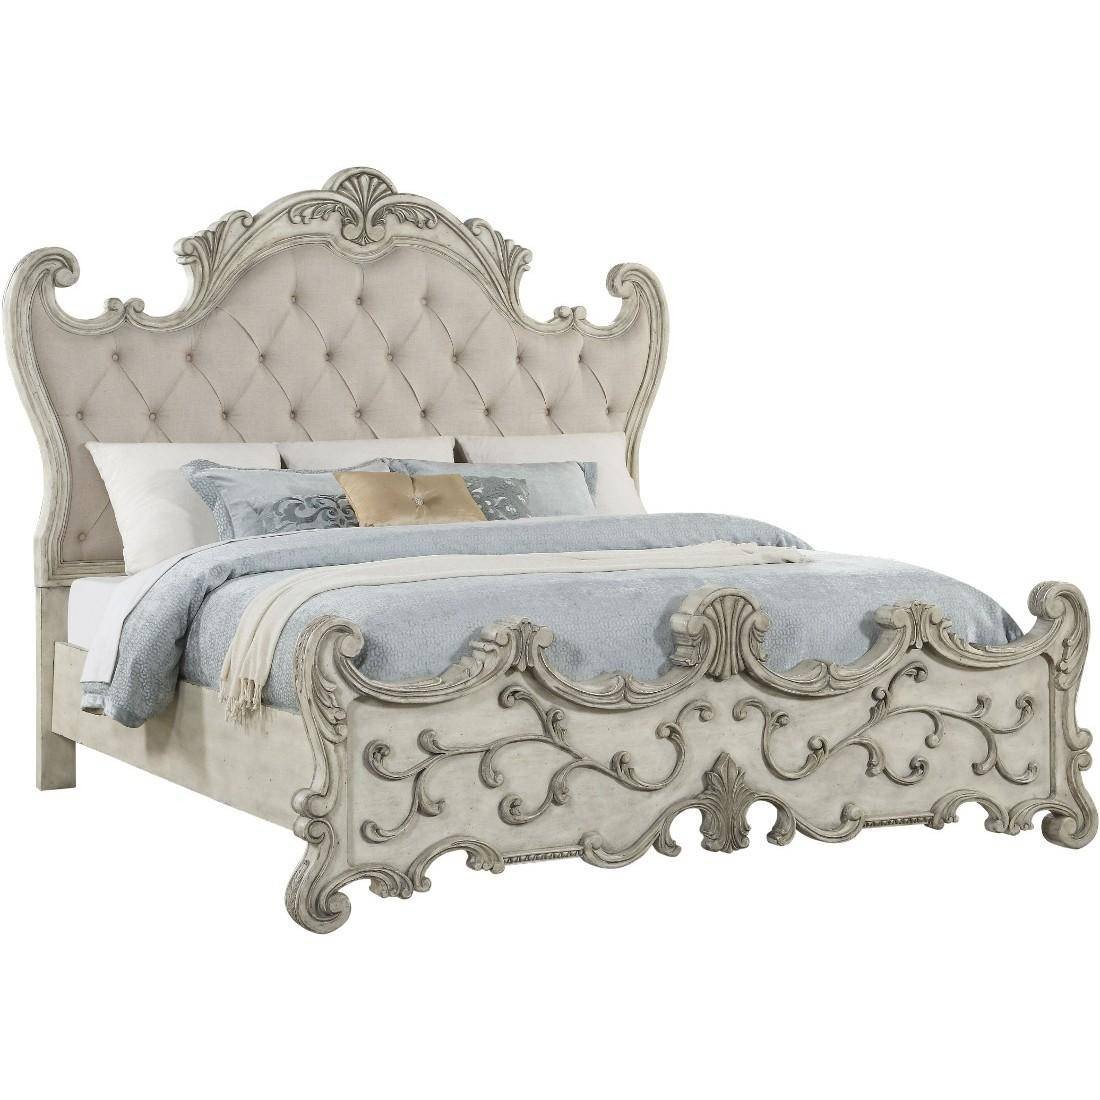 Cheap White Bedroom Furniture Set Fresh Luxury King Bedroom Set 5p W Chest Antique White Fabric